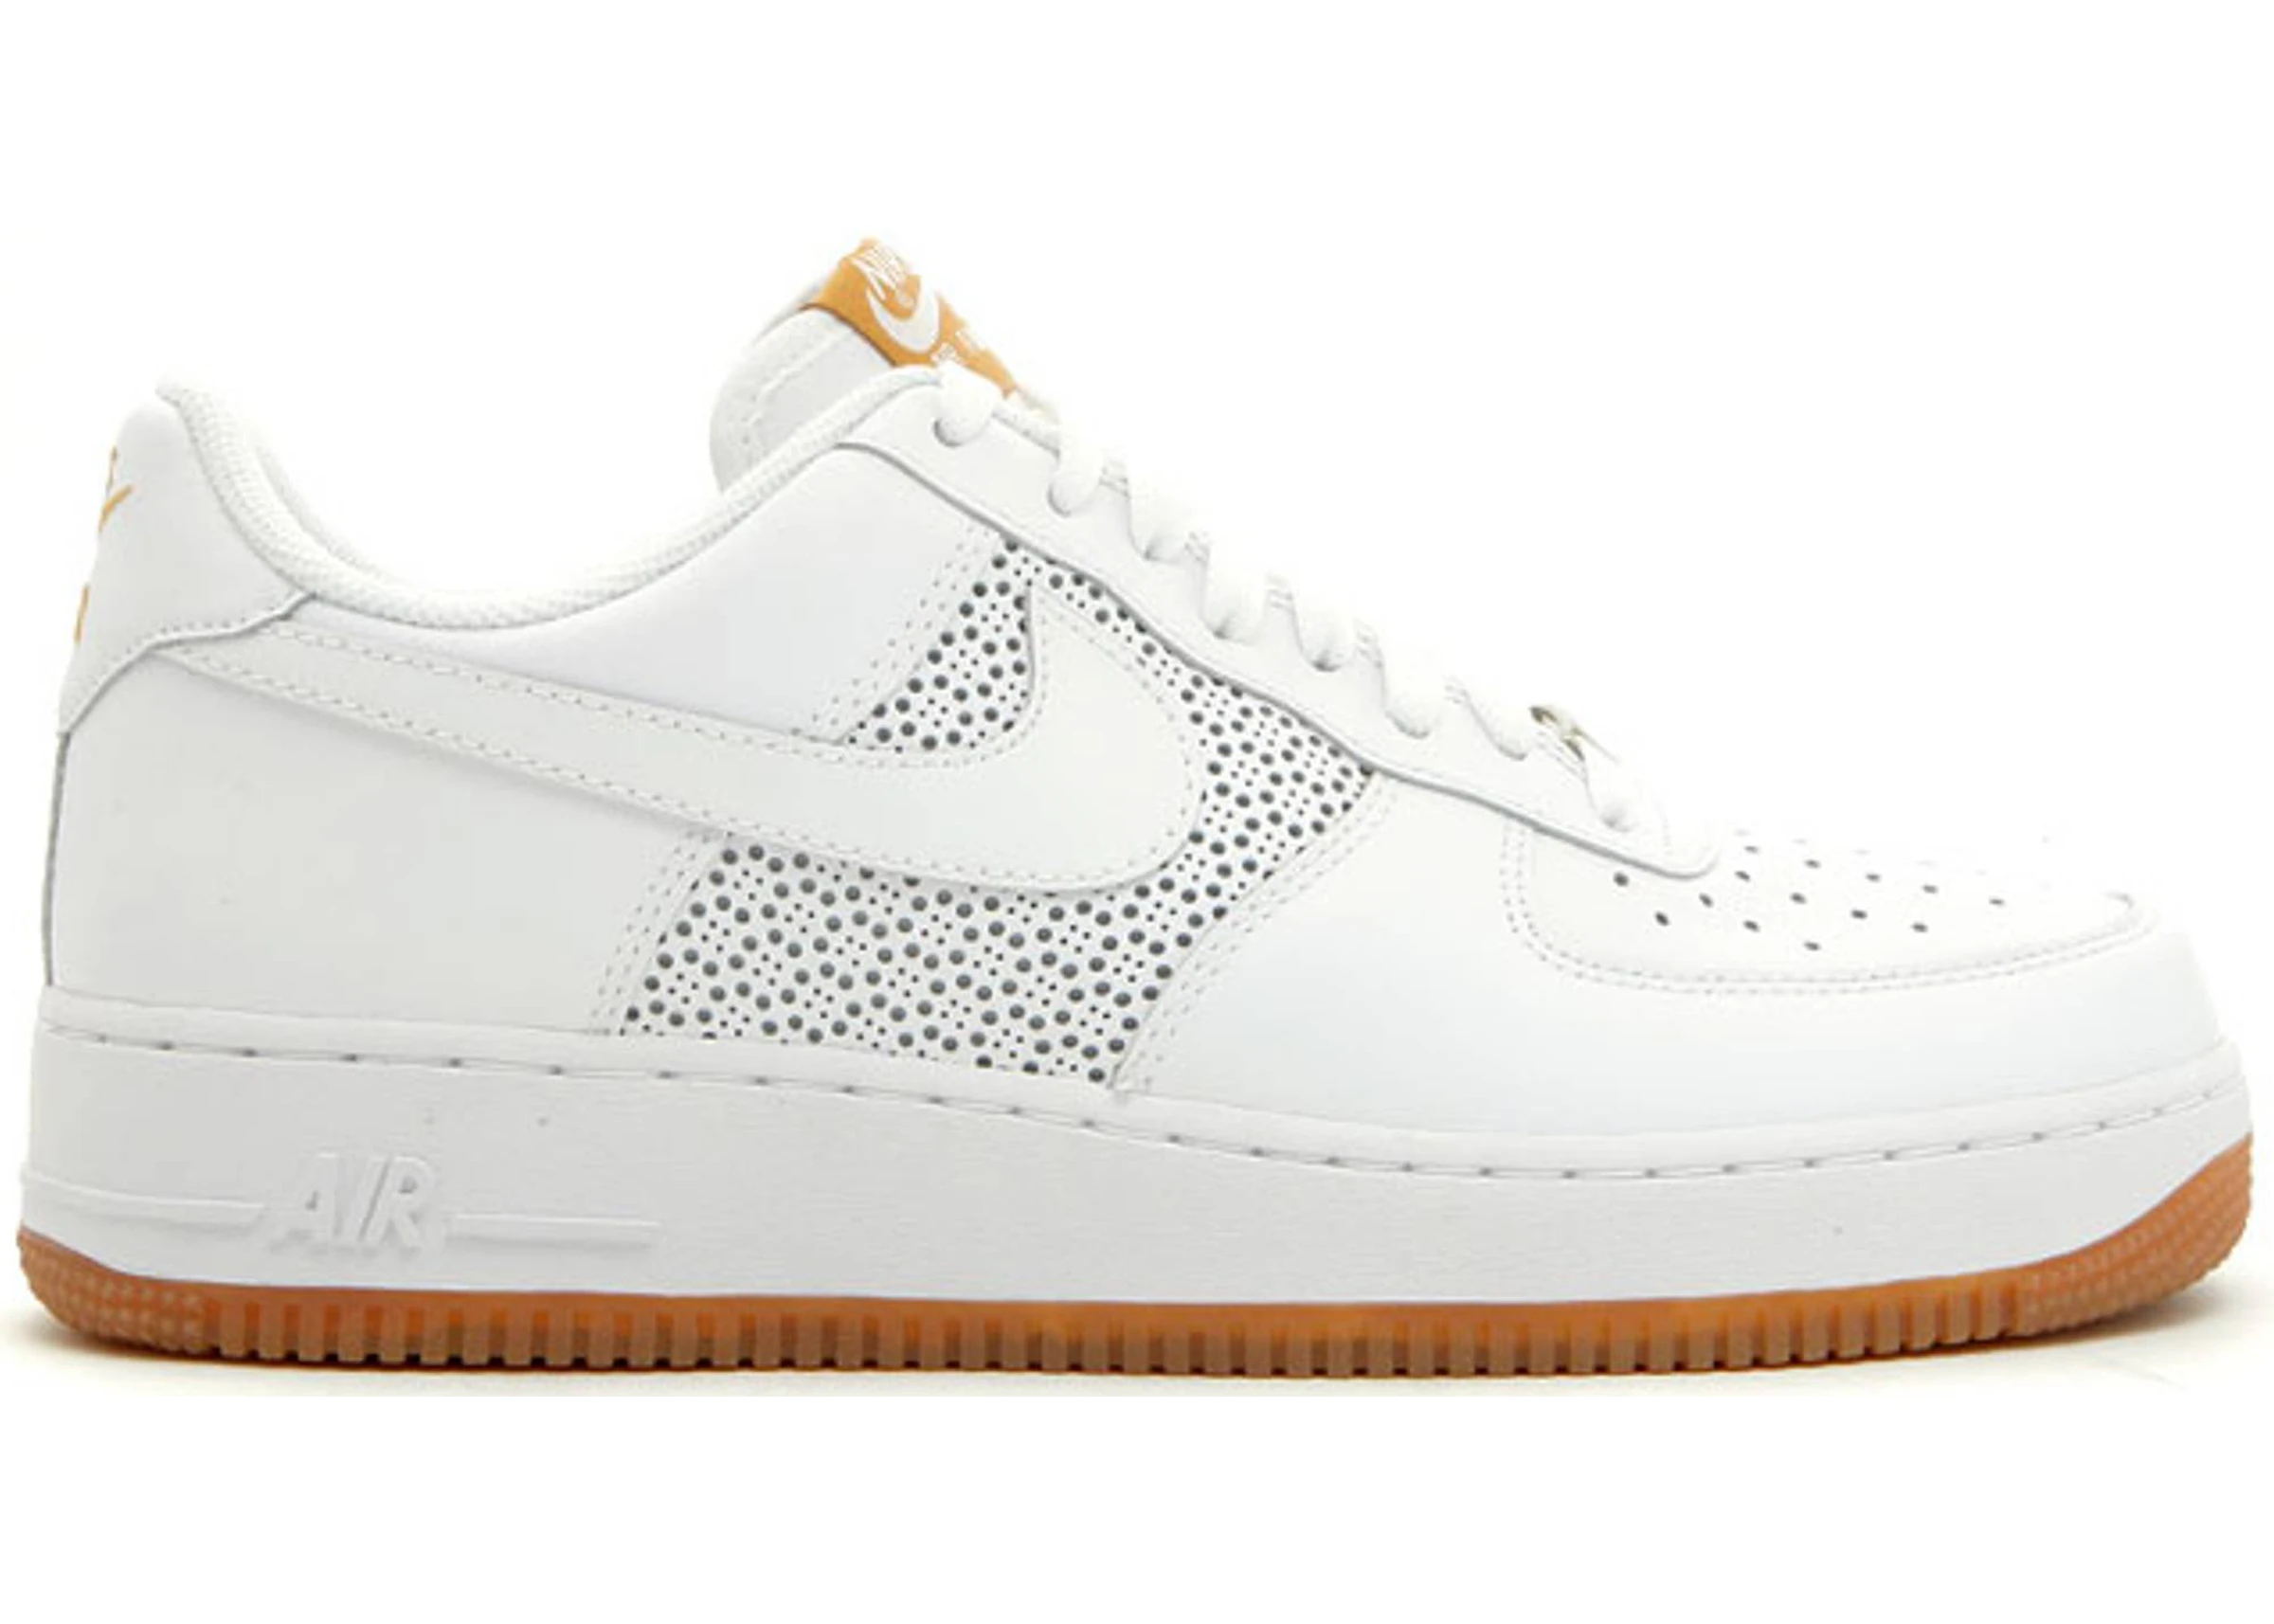 licentie hoesten plastic Nike Air Force 1 Low Perforated Sidepanels White Gum - 315122-992 - US